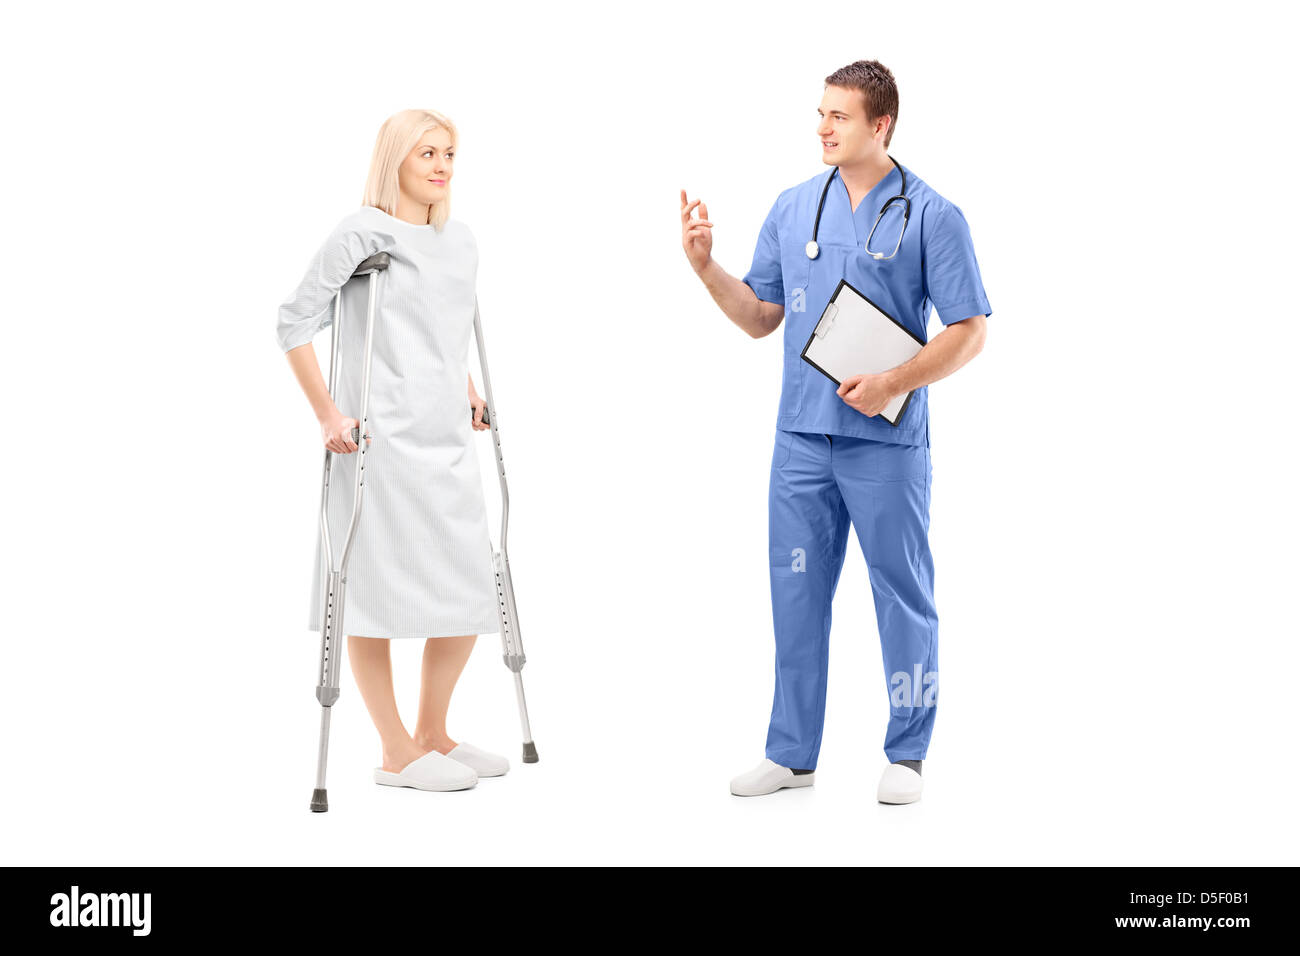 Full length portrait of a blond female patient in hospital gown with crutches and medical practitioner during a conversation Stock Photo